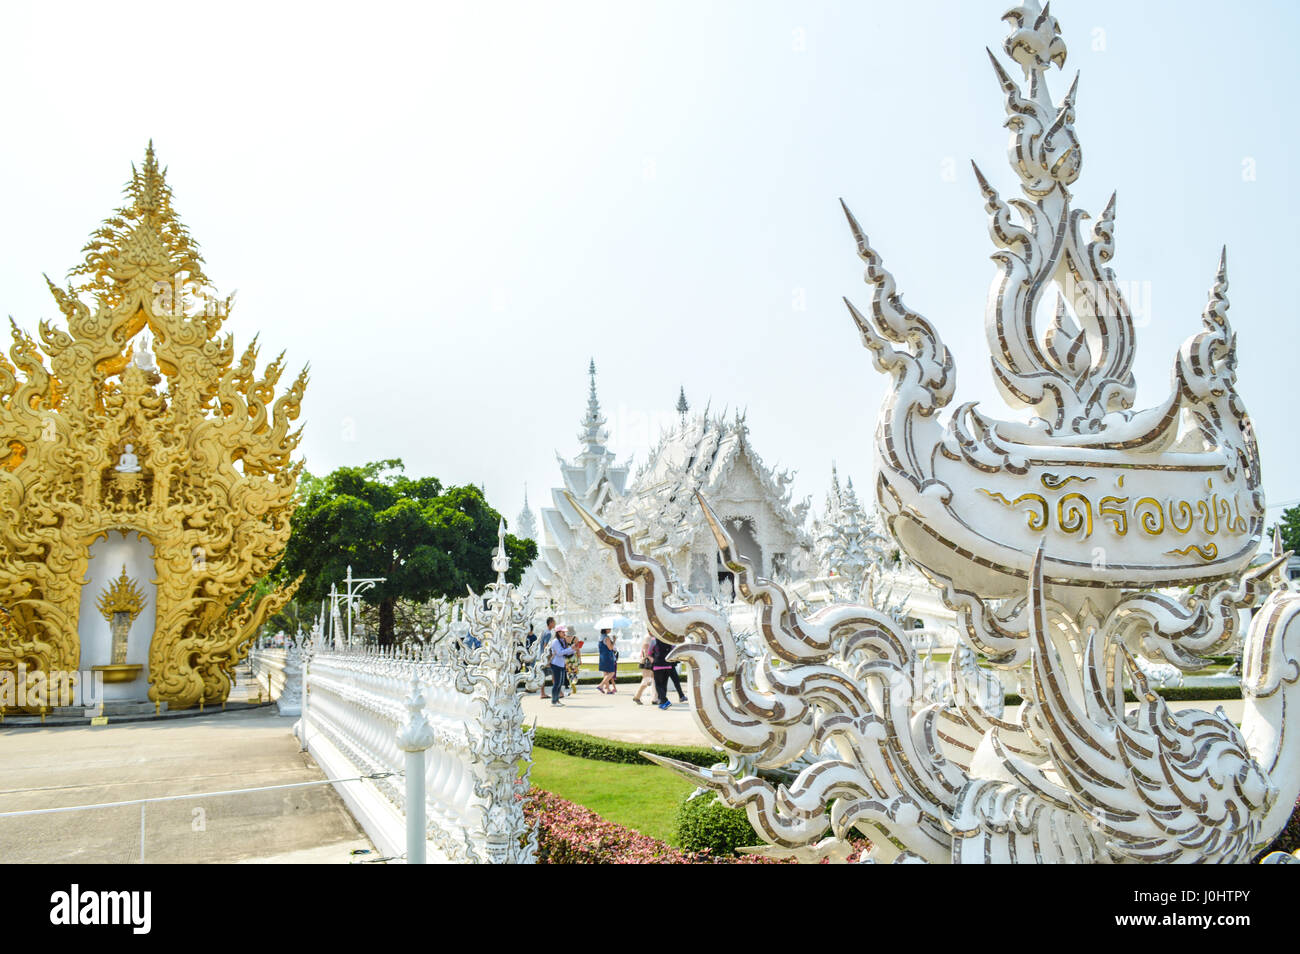 Chiang Rai, Thailand - April 4, 2017 : Wat Rong Khun or White Temple, designed and constructed by Chalermchai Kositpipat. Stock Photo